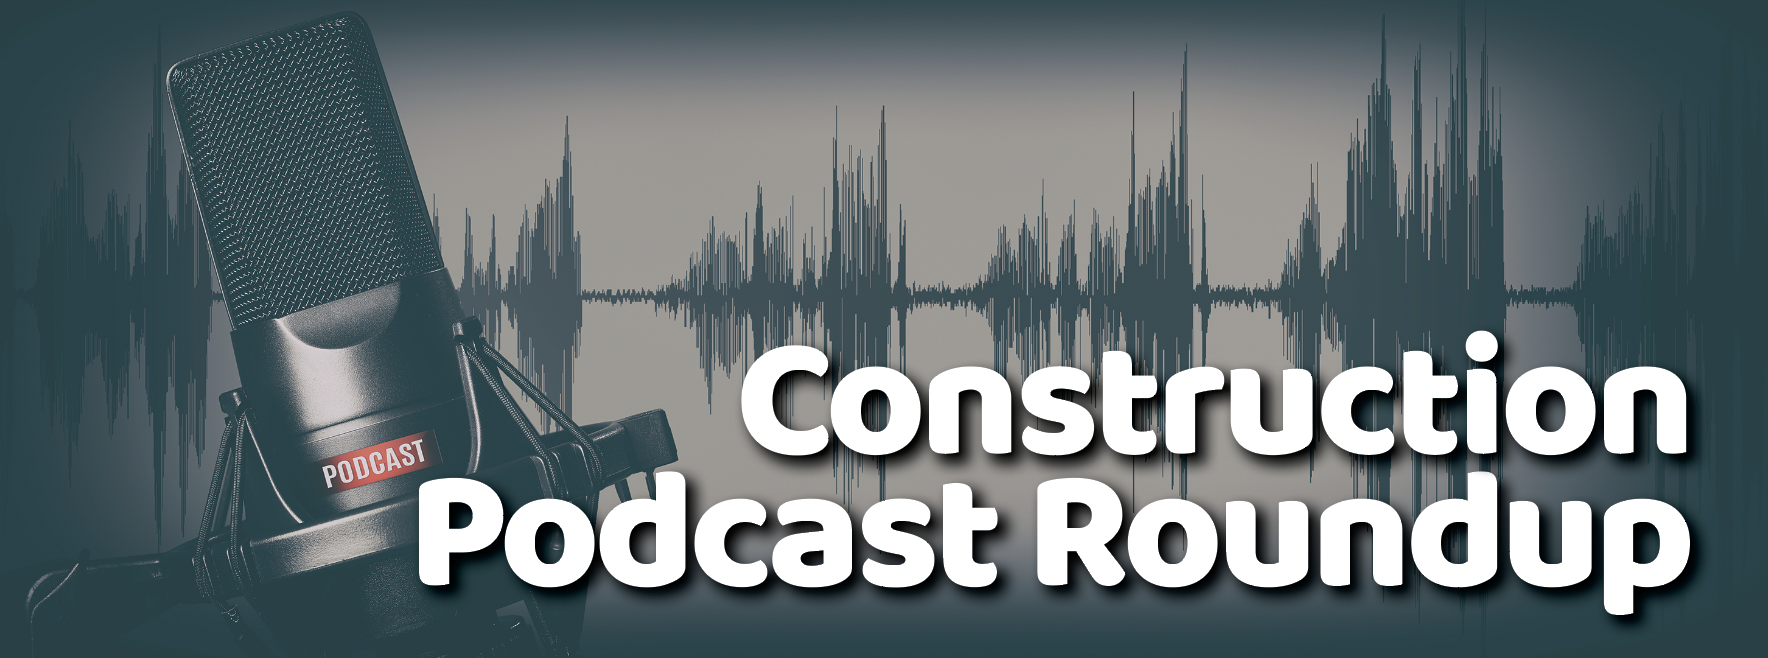 Audio Construction Resource Roundup: Podcasts that Build Interest